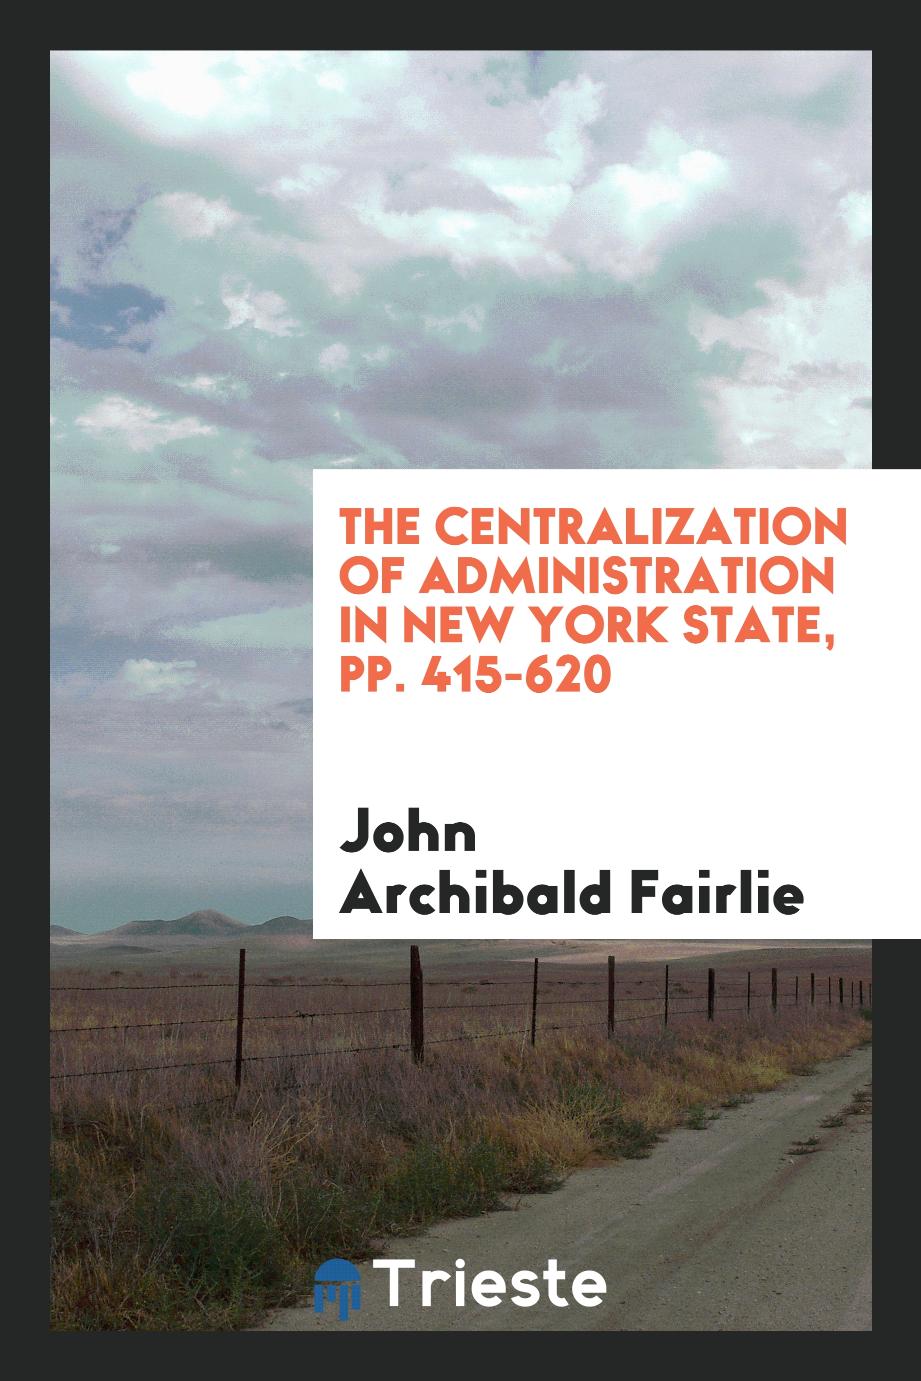 The centralization of administration in New York State, pp. 415-620